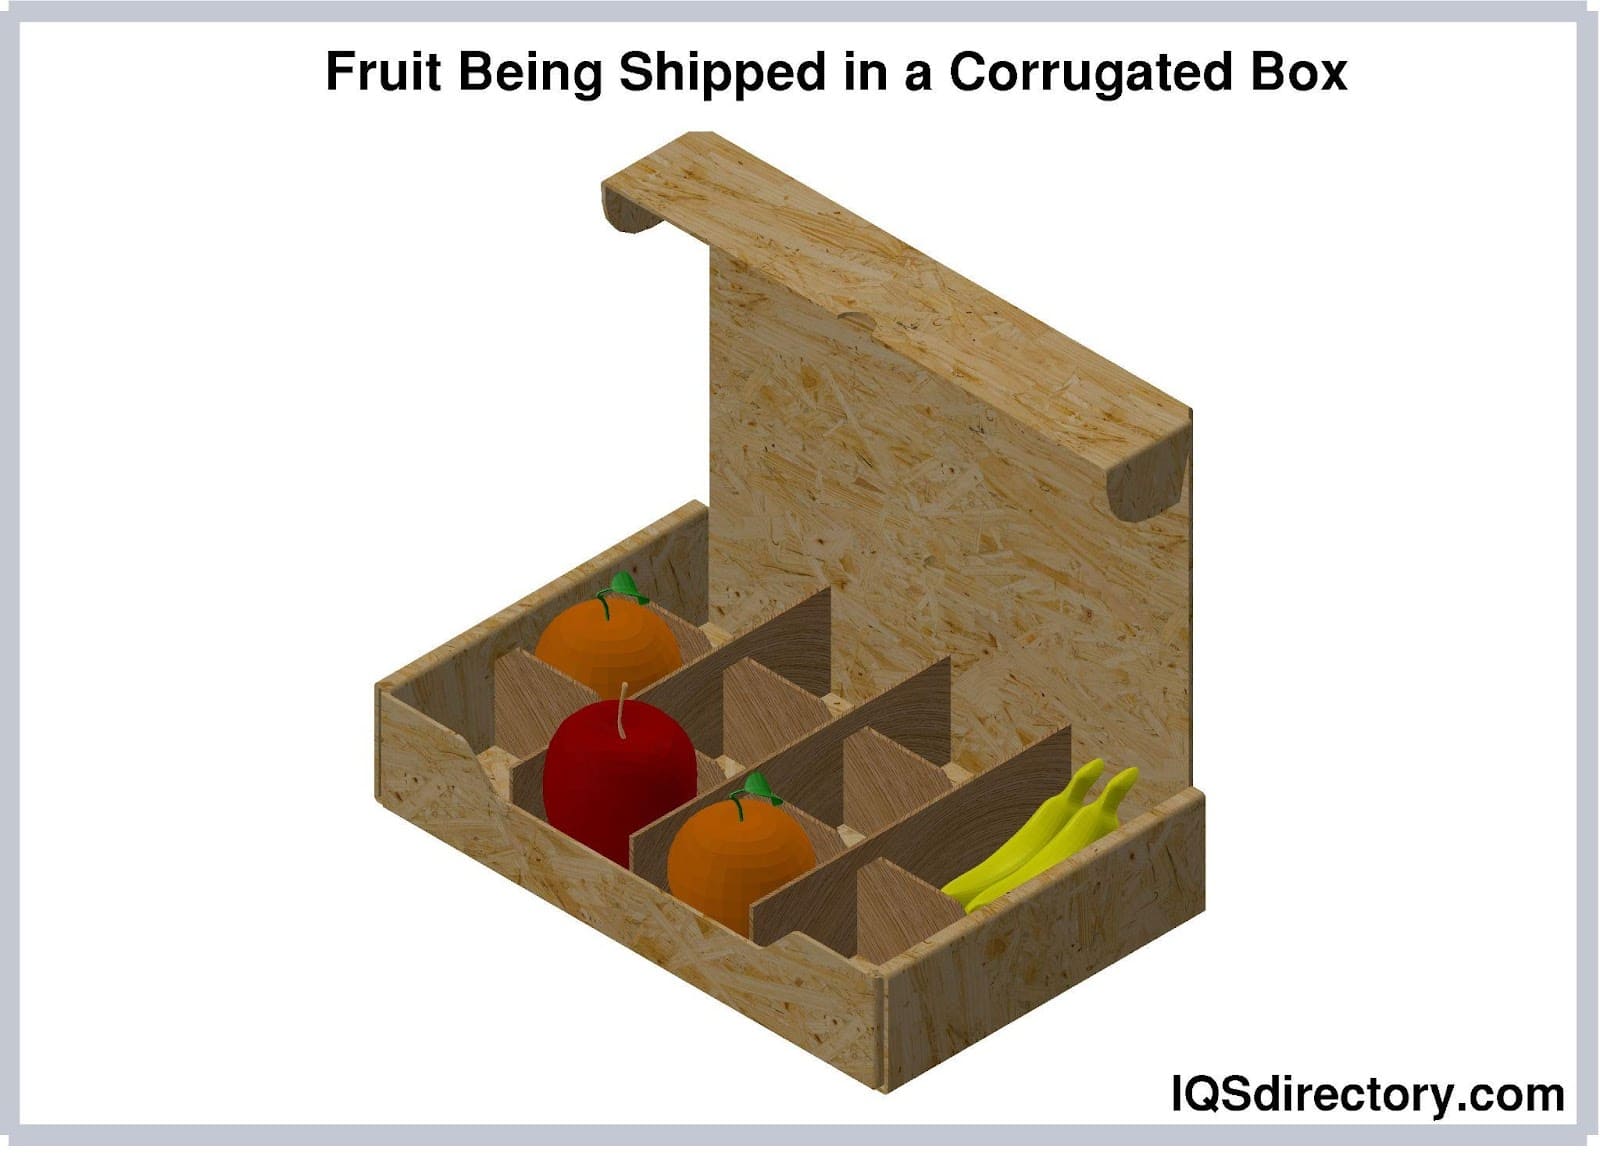 Fruit Being Shipped in a Corrugated Box